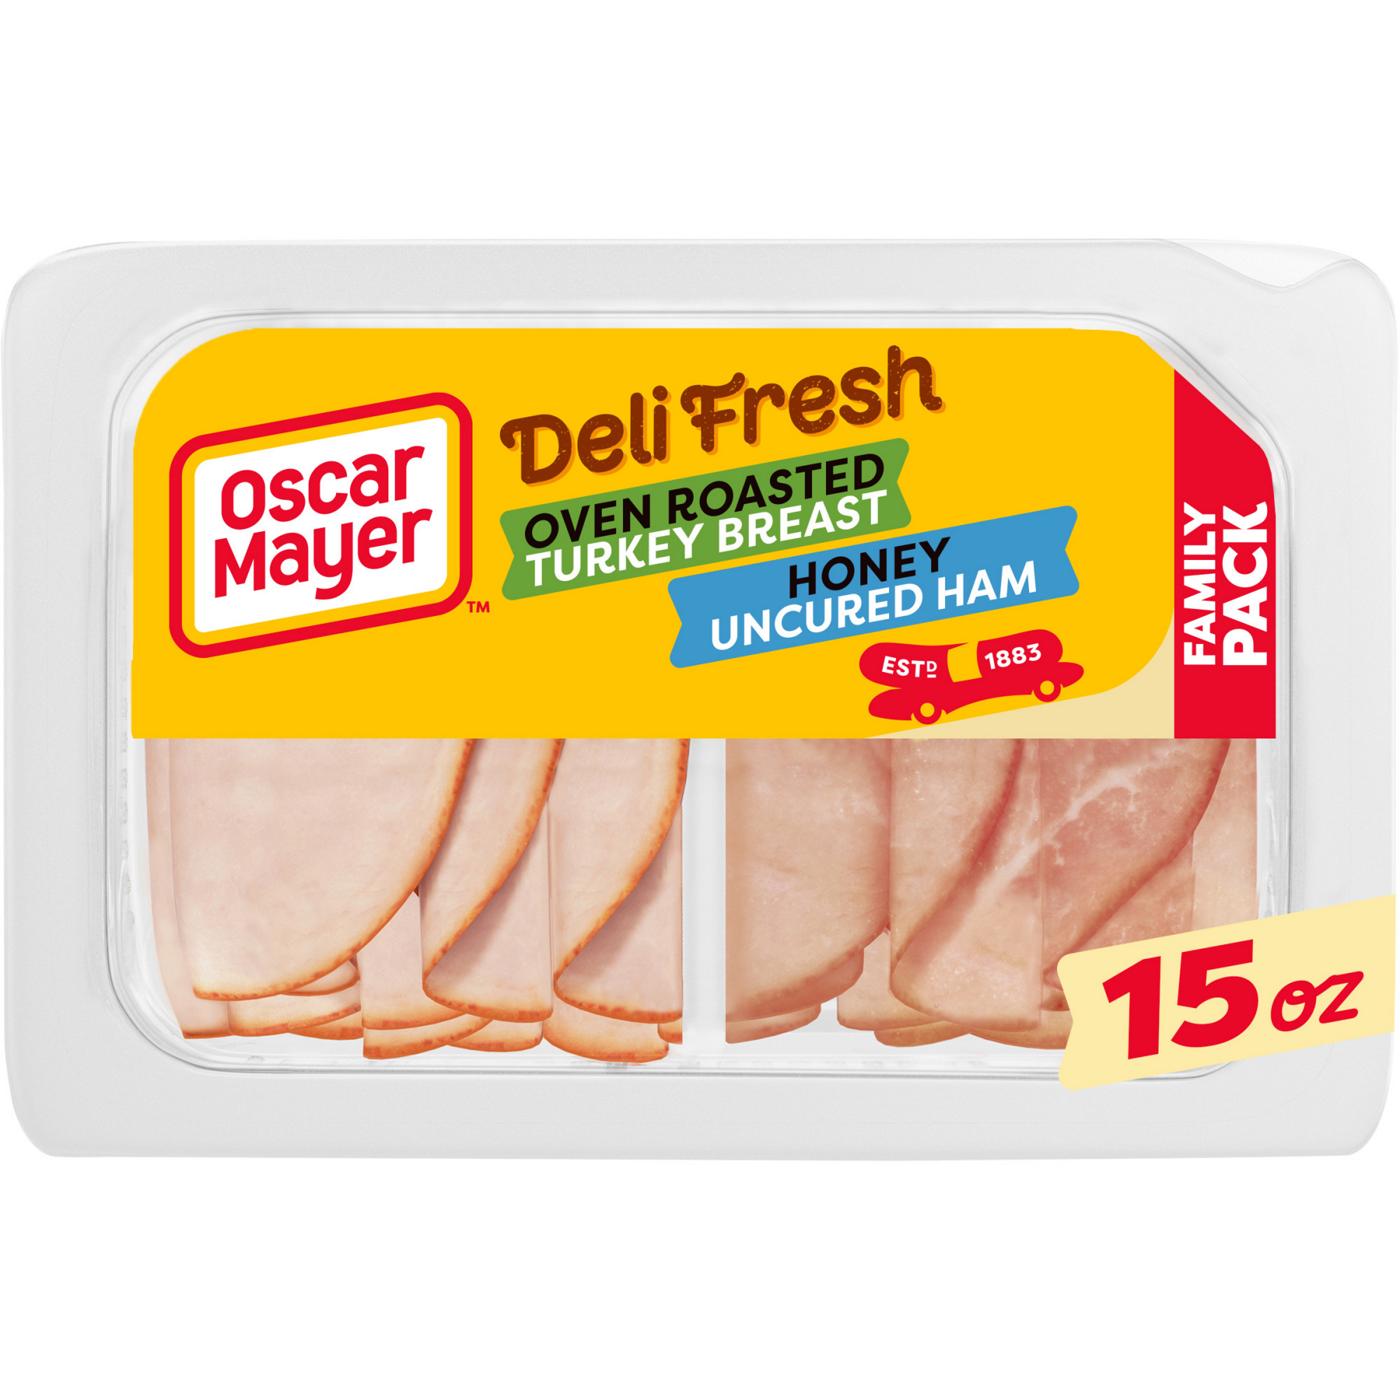 Oscar Mayer Deli Fresh Oven Roasted Turkey Breast & Honey Uncured Ham Sliced Lunch Meat - Family Pack; image 1 of 6